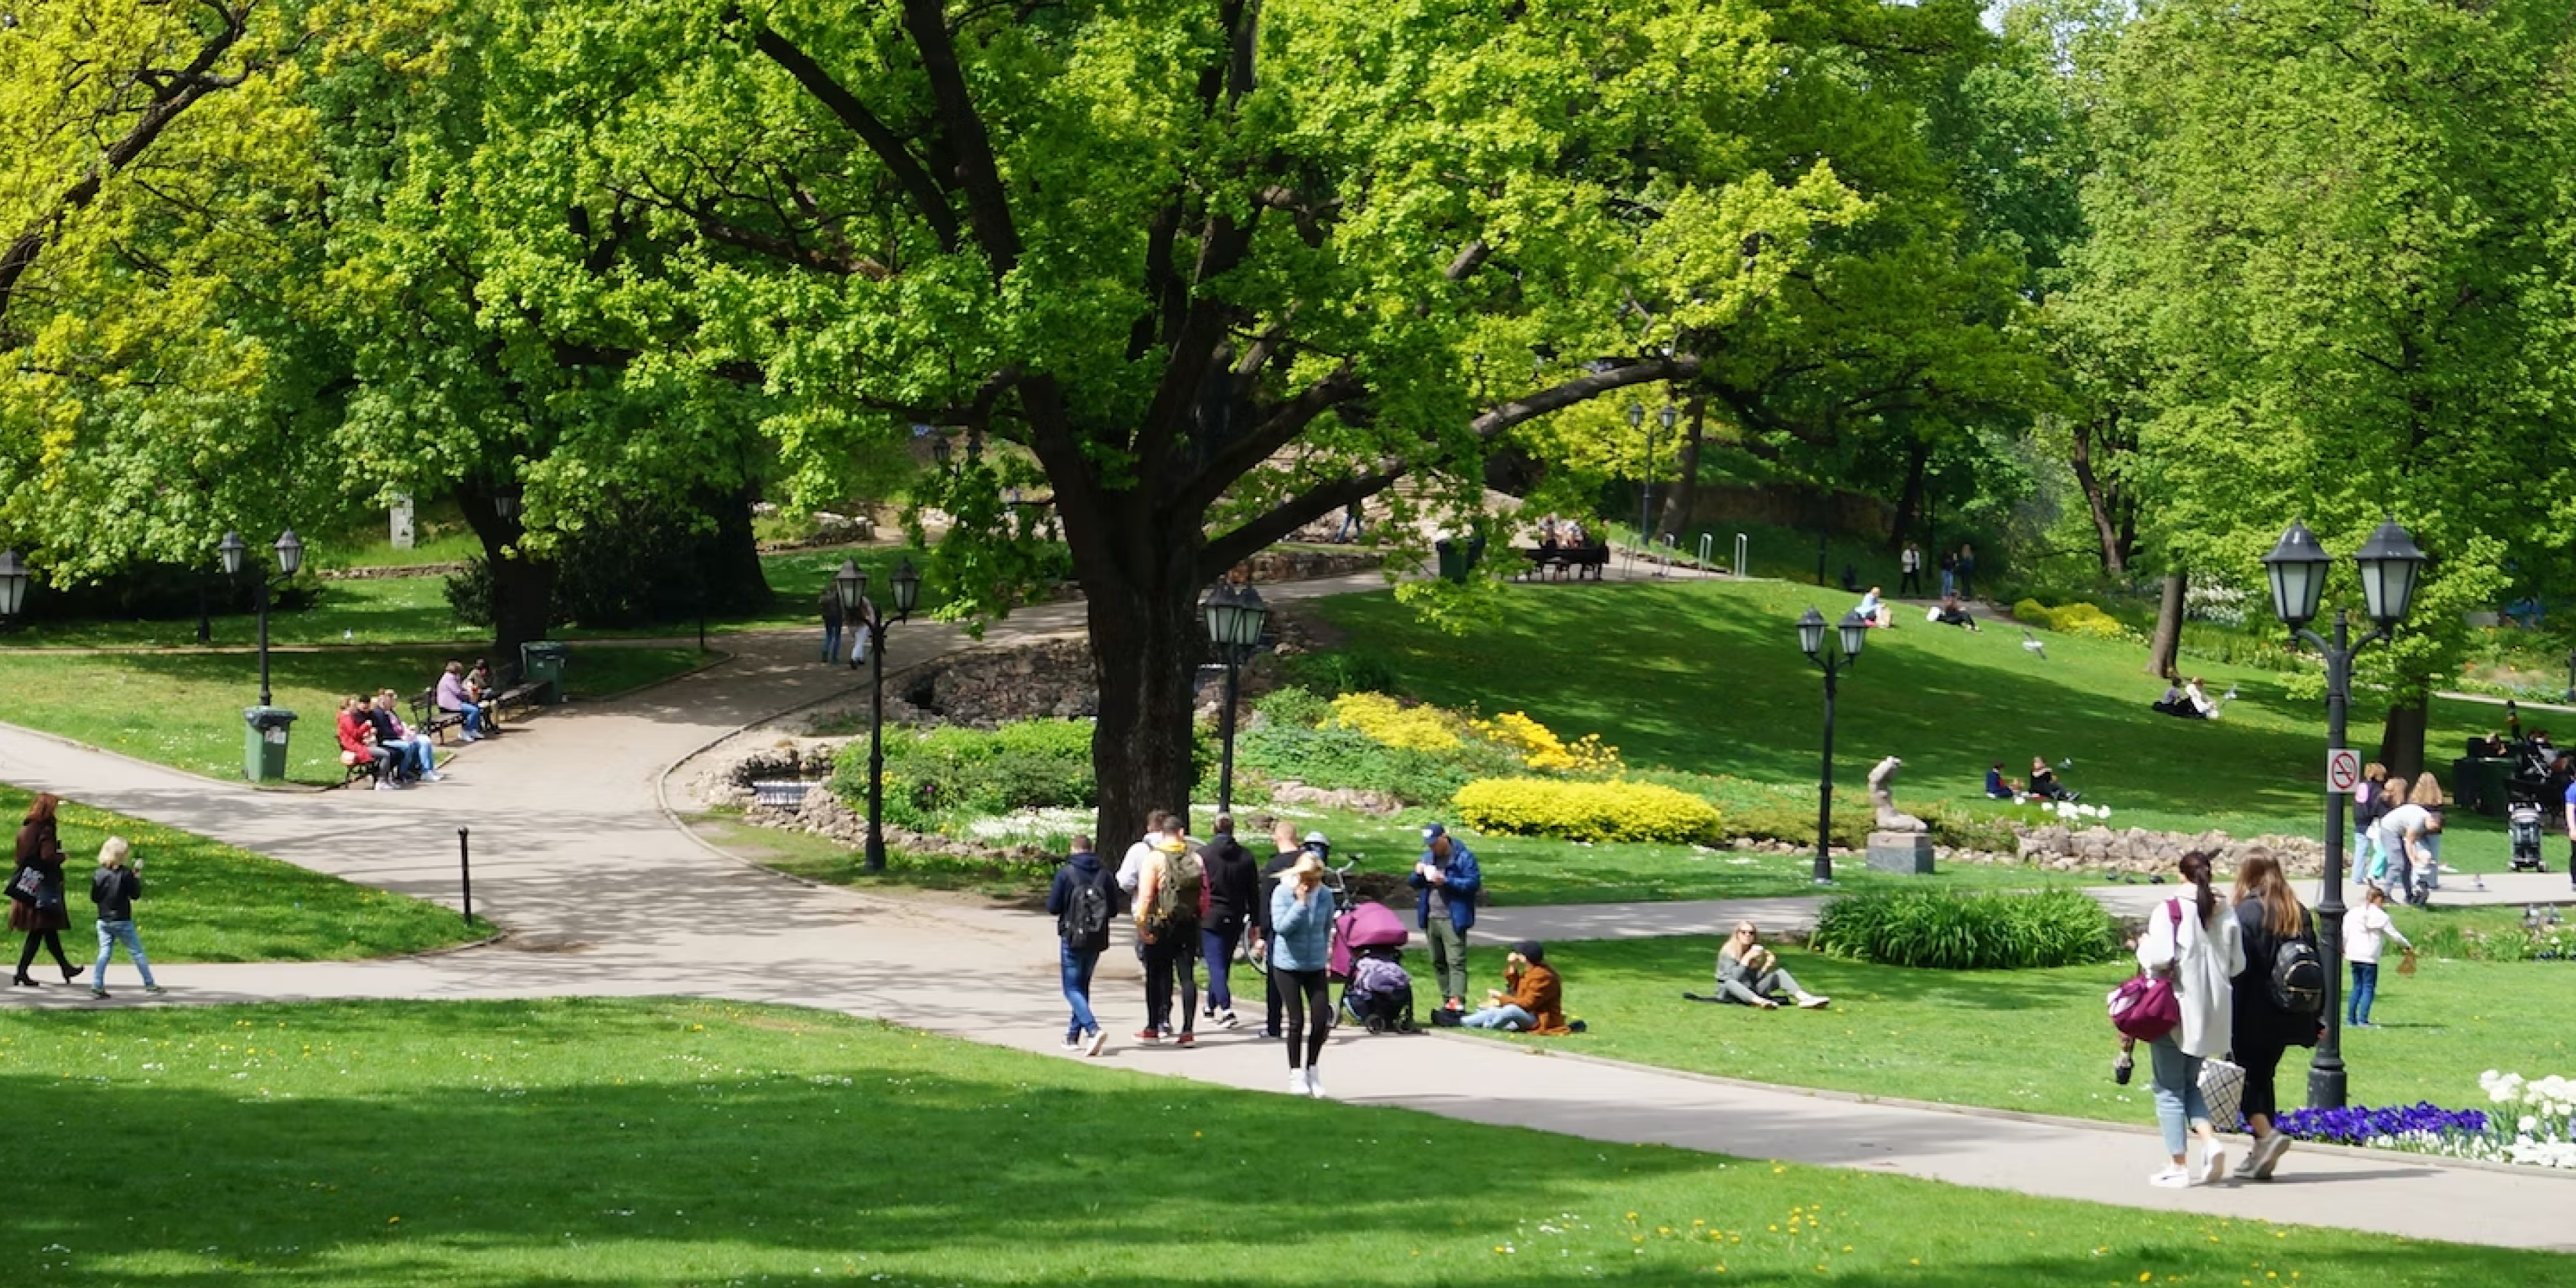 Green Spaces in Urban Areas: The Key to Resilient Cities